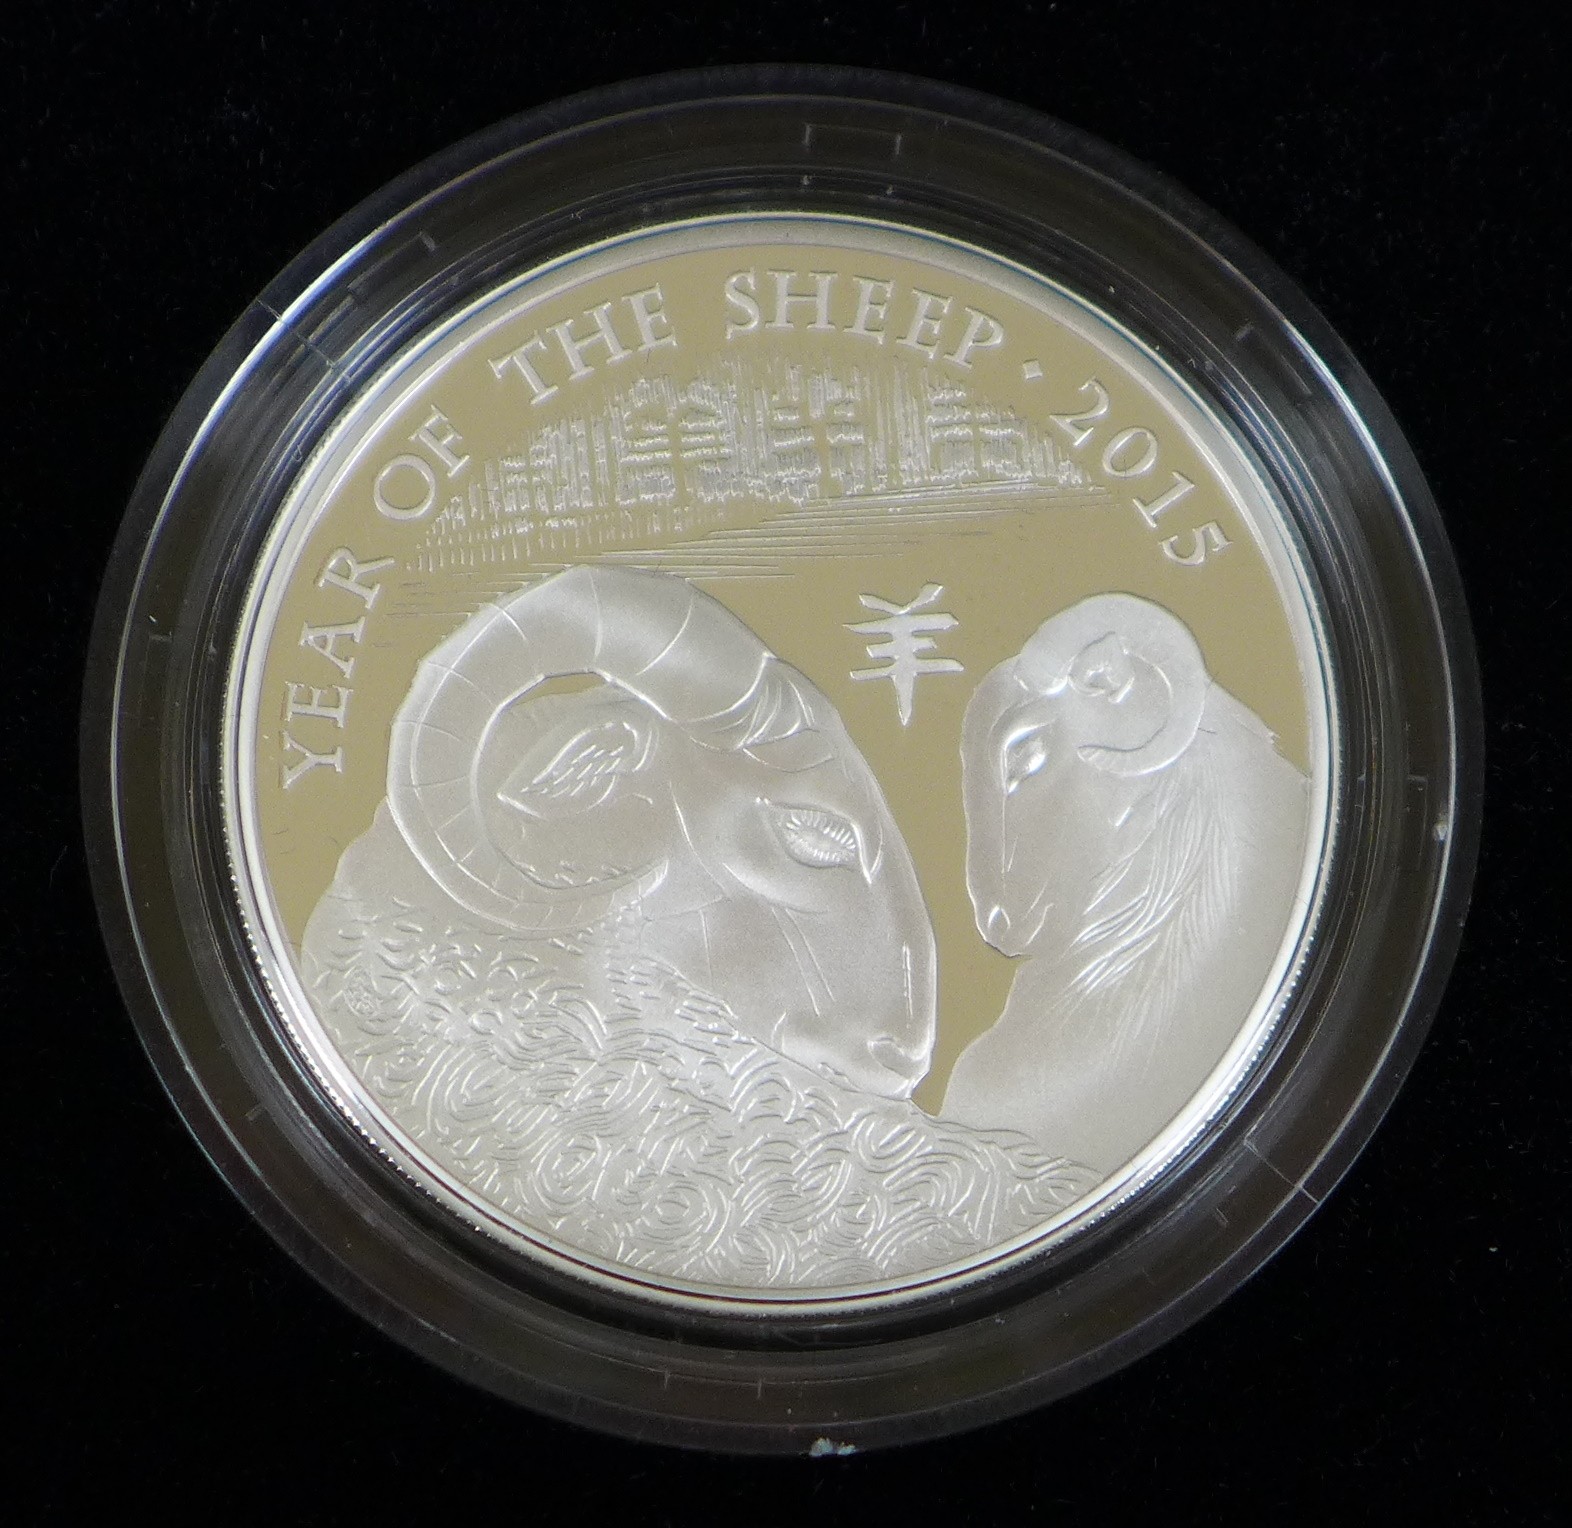 Seven Elizabeth II limited edition Royal Mint Shengxiao Collection £2 one ounce 999 silver coins, a - Image 3 of 5